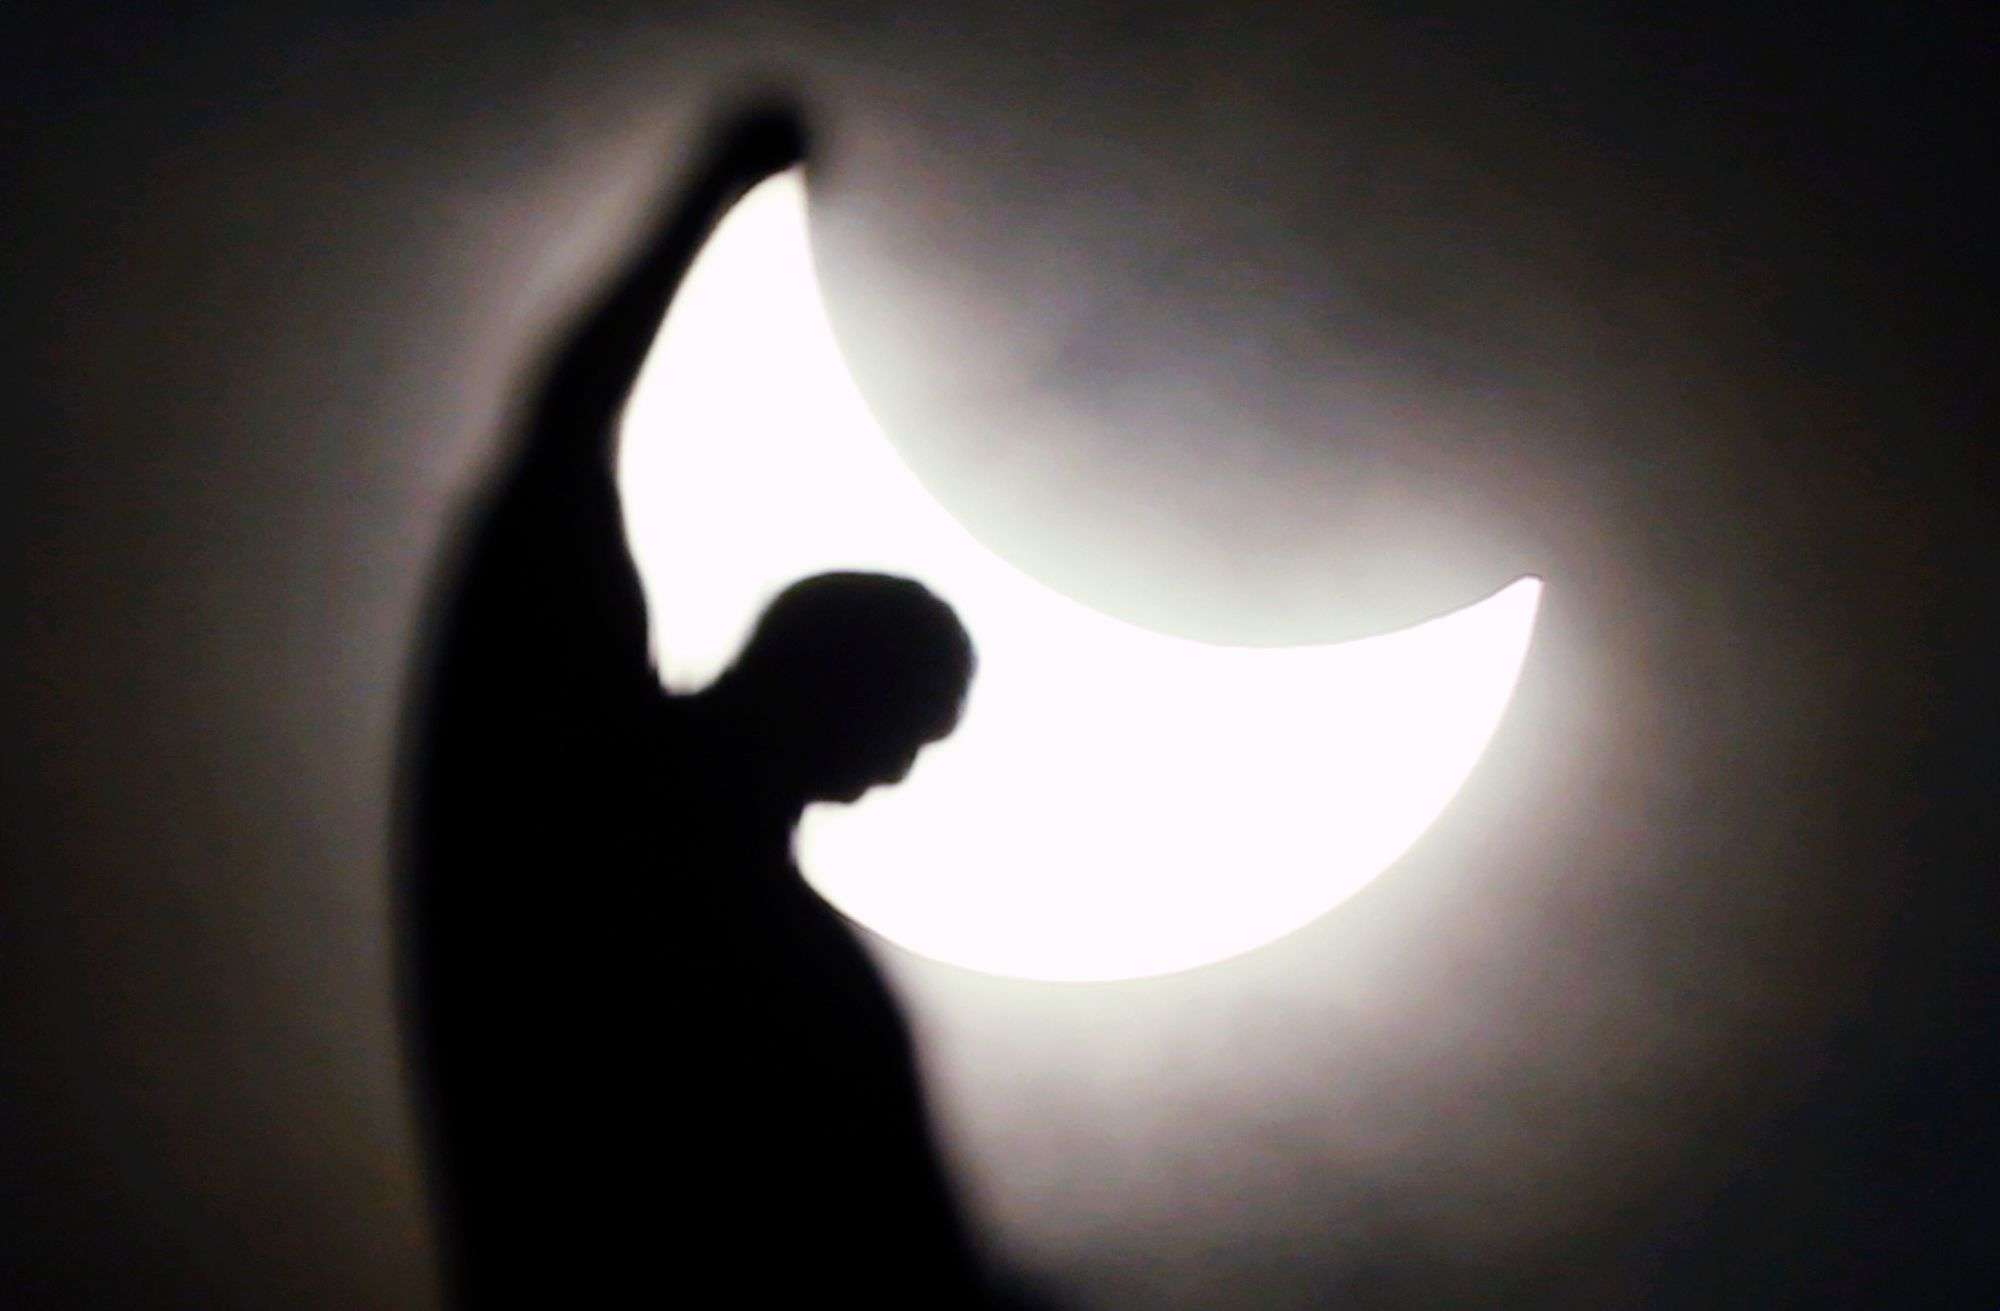 The moon starts to block the sun during a solar eclipse over a statue of the Duomo gothic cathedral in Milan, Italy. (AP Photo/Luca Bruno)